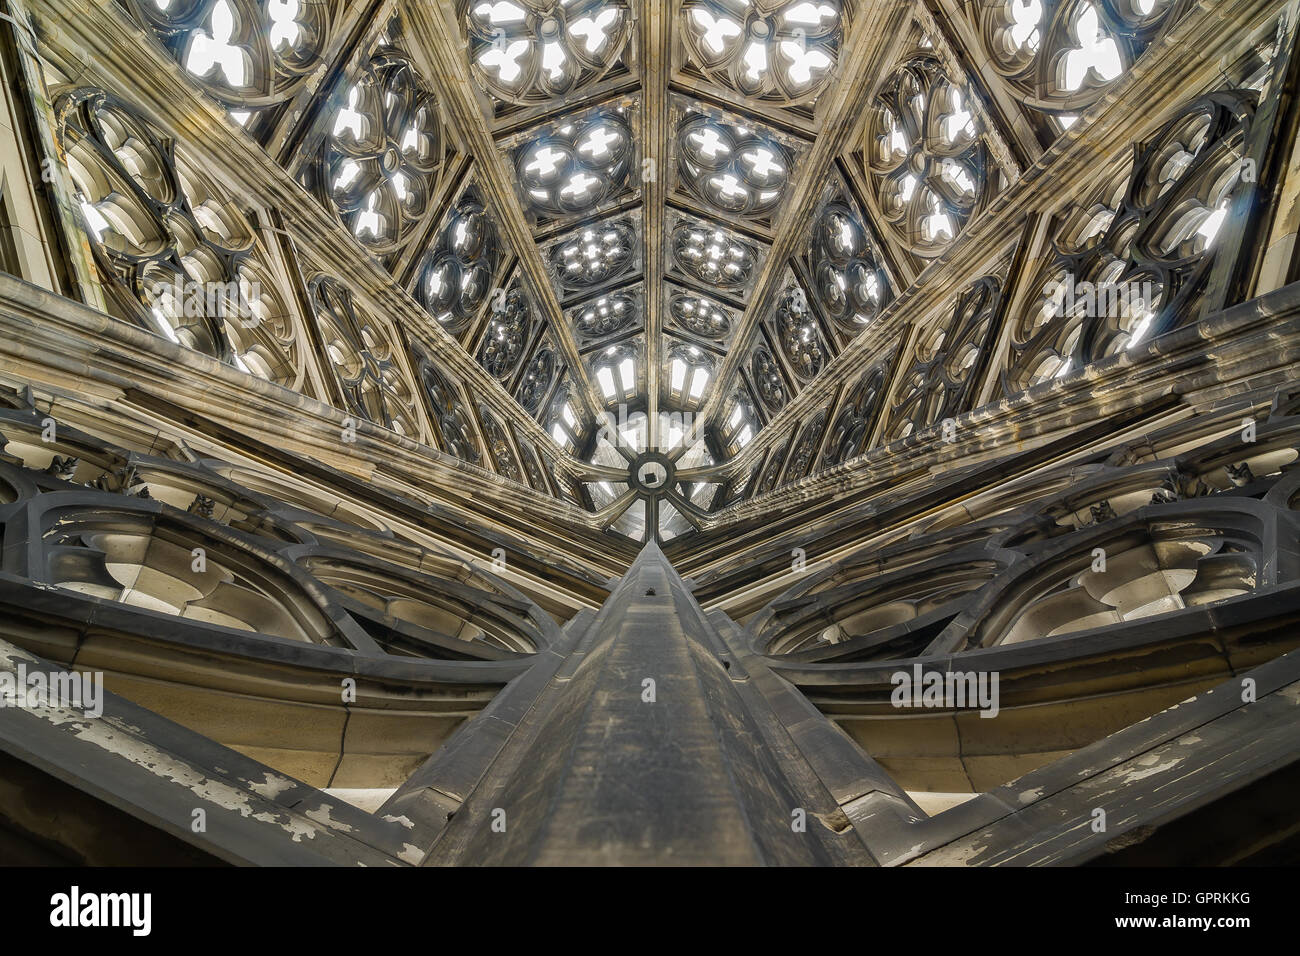 Ceiling of the Roman Catholic Cologne Cathedral, Germany. Stock Photo